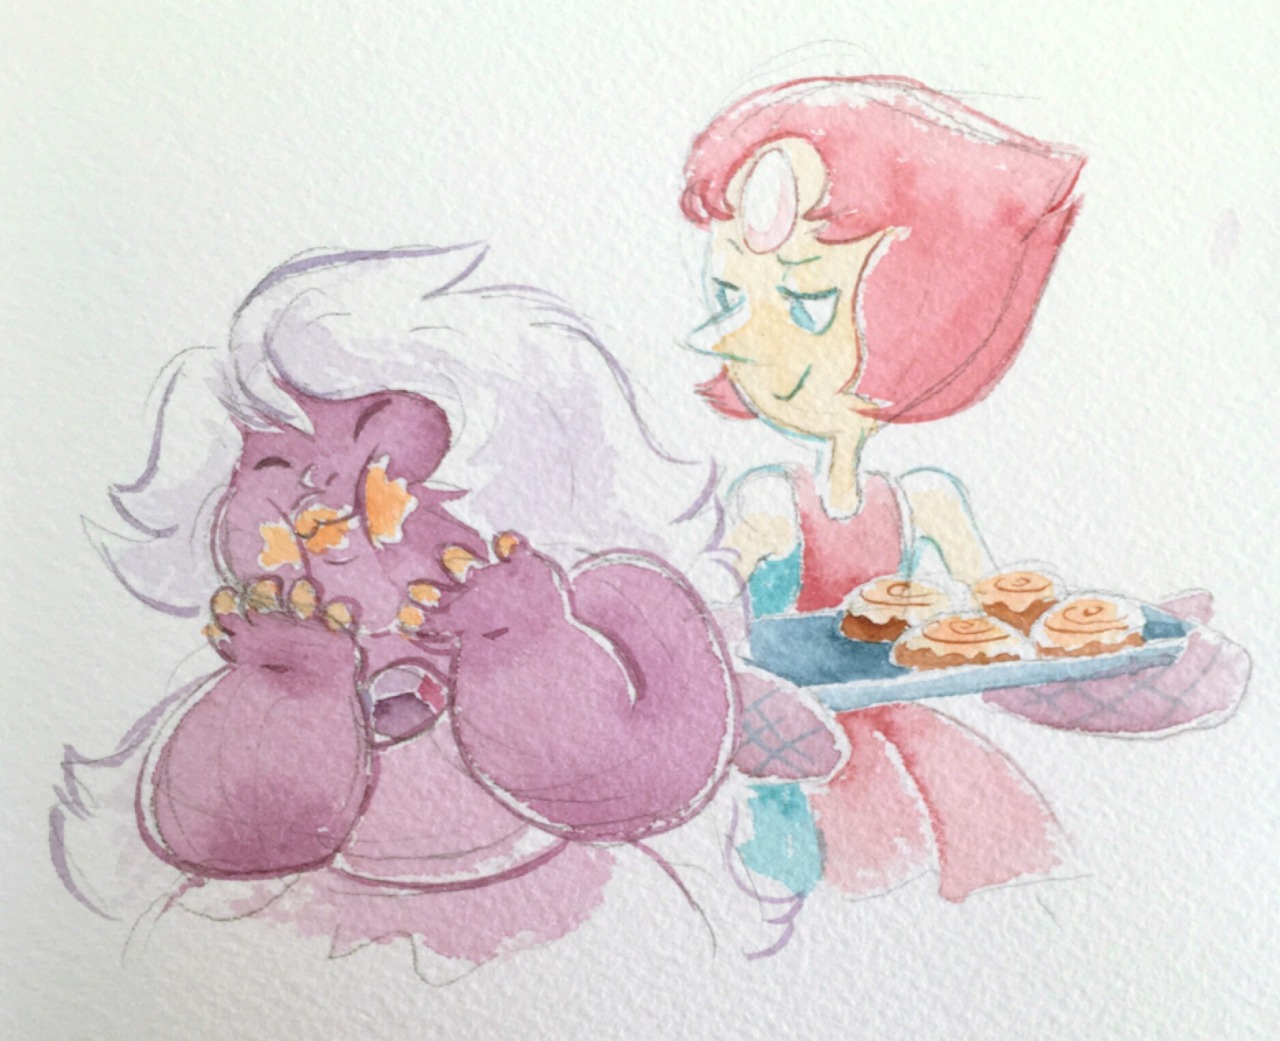 “Don’t touch them yet Amethyst, they haven’t even been baked.